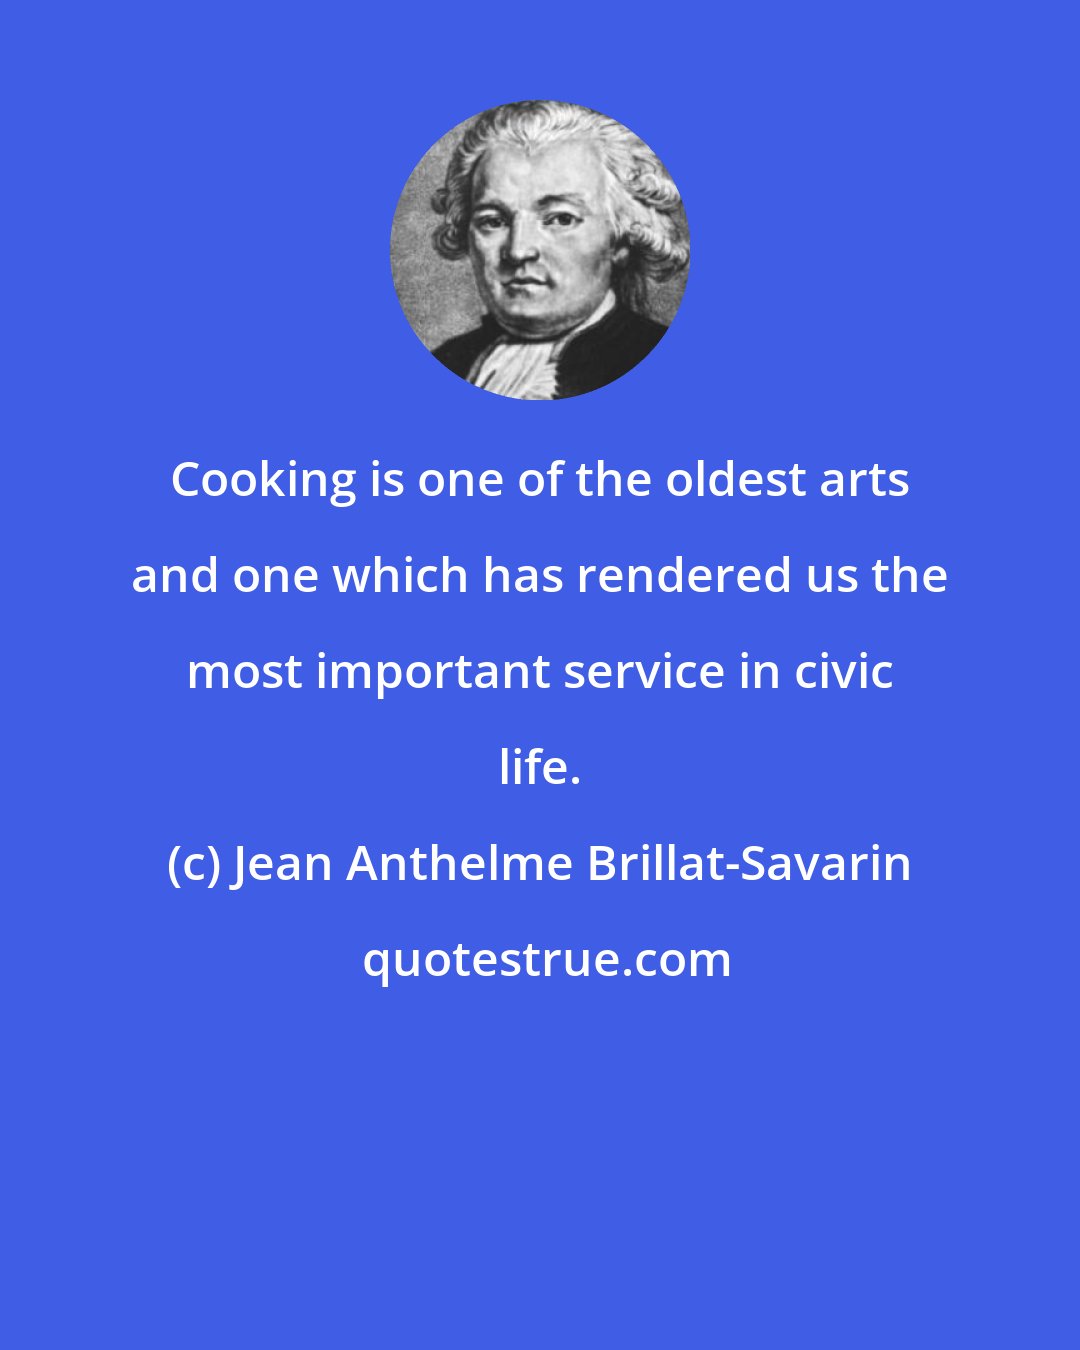 Jean Anthelme Brillat-Savarin: Cooking is one of the oldest arts and one which has rendered us the most important service in civic life.